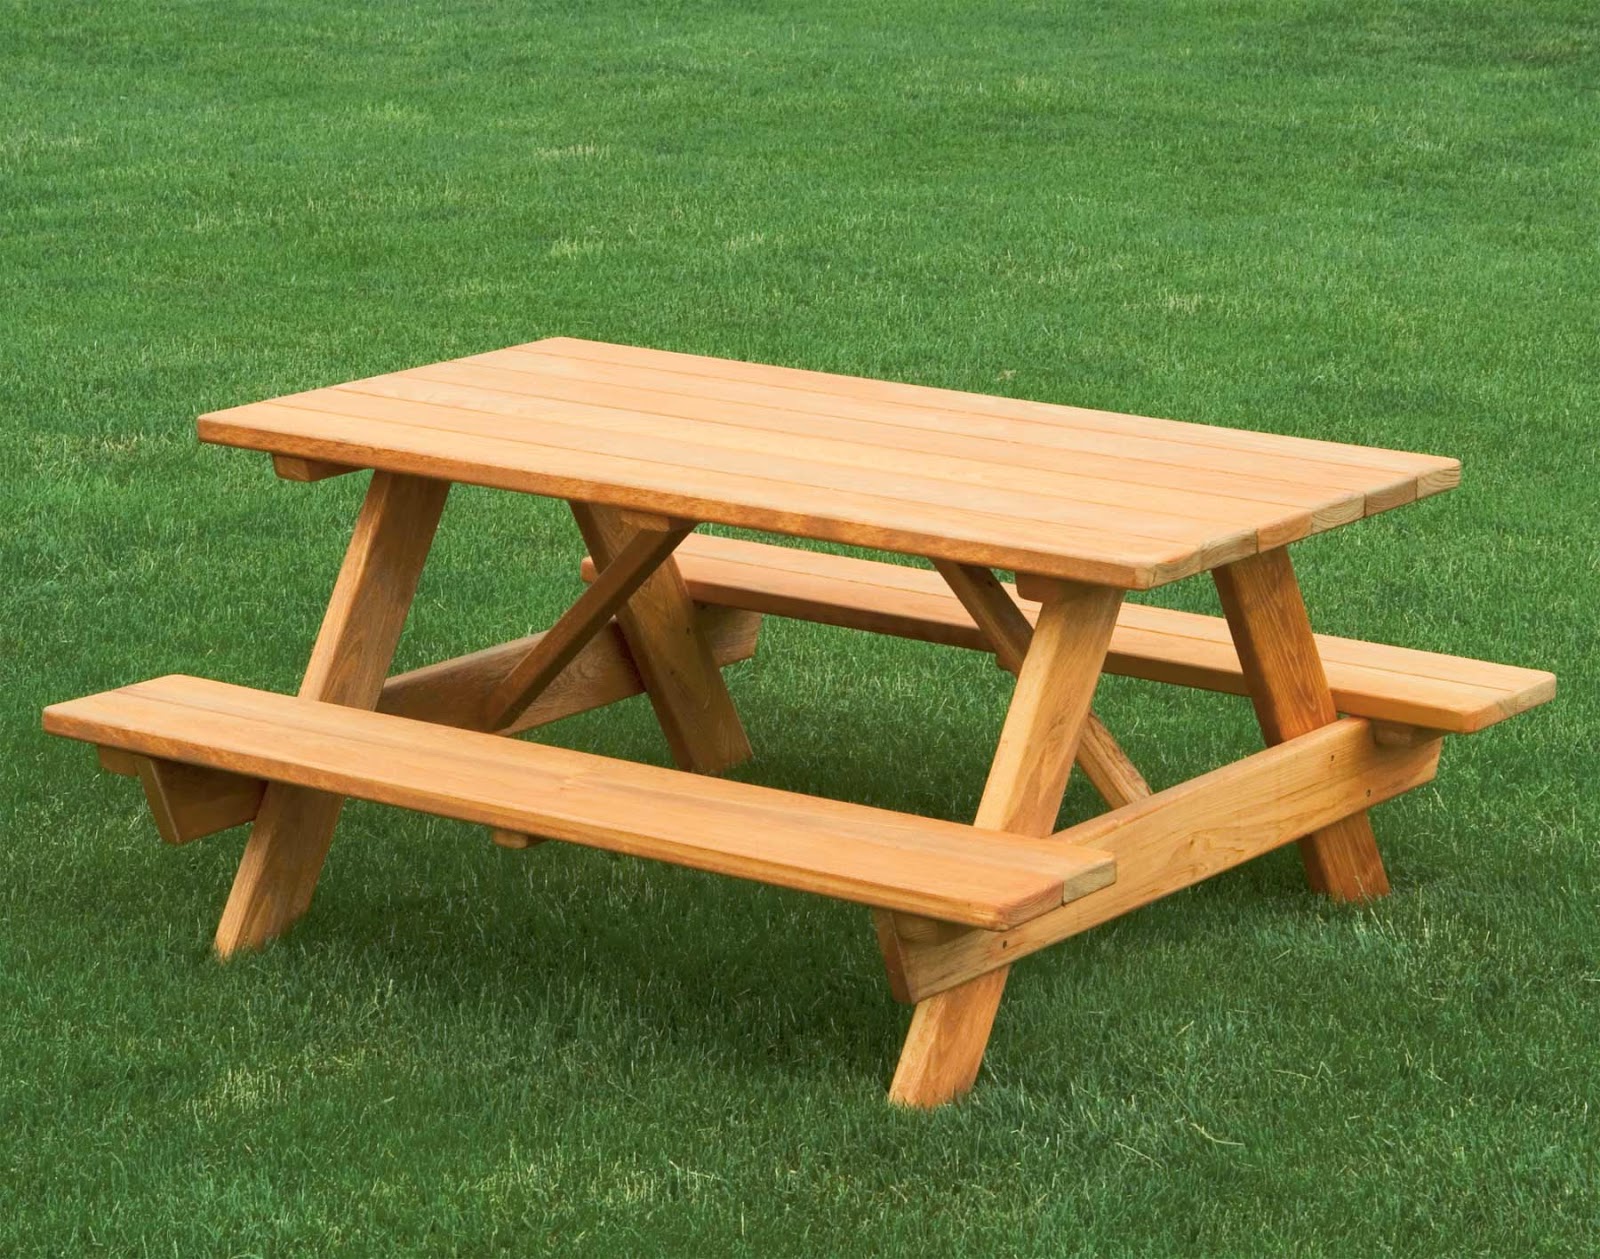 woodworking plans reviewed: how to build a picnic table